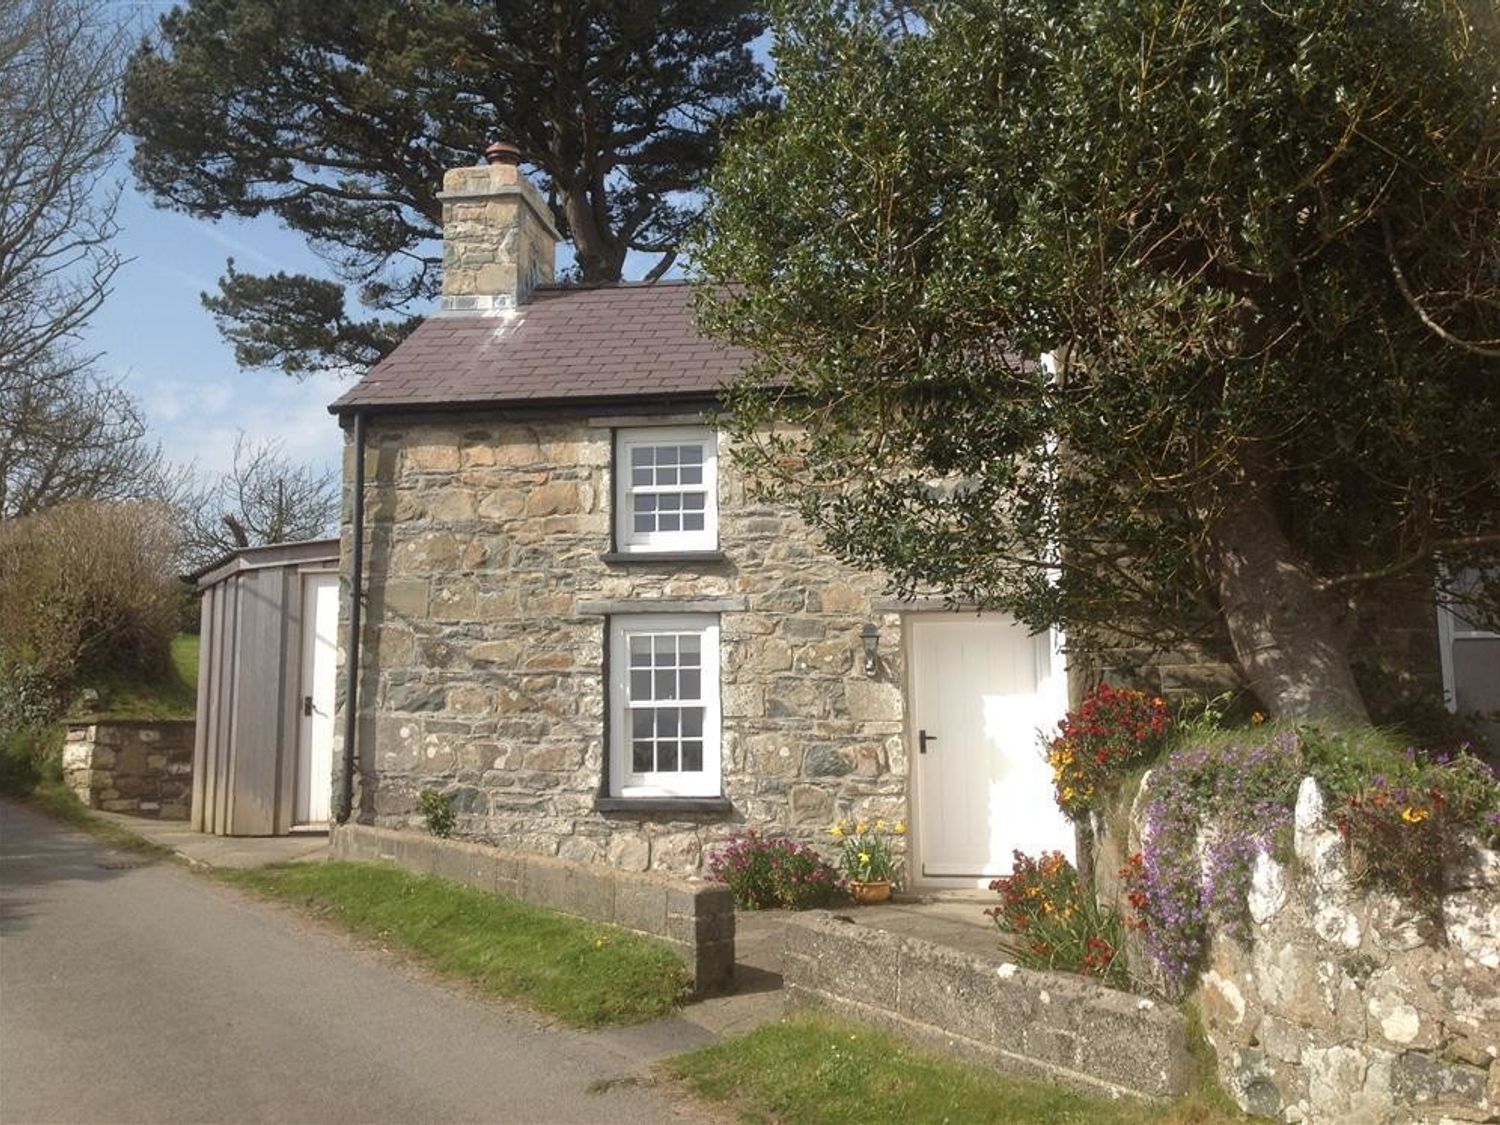 West End Cottage - South Wales - 1035494 - photo 1